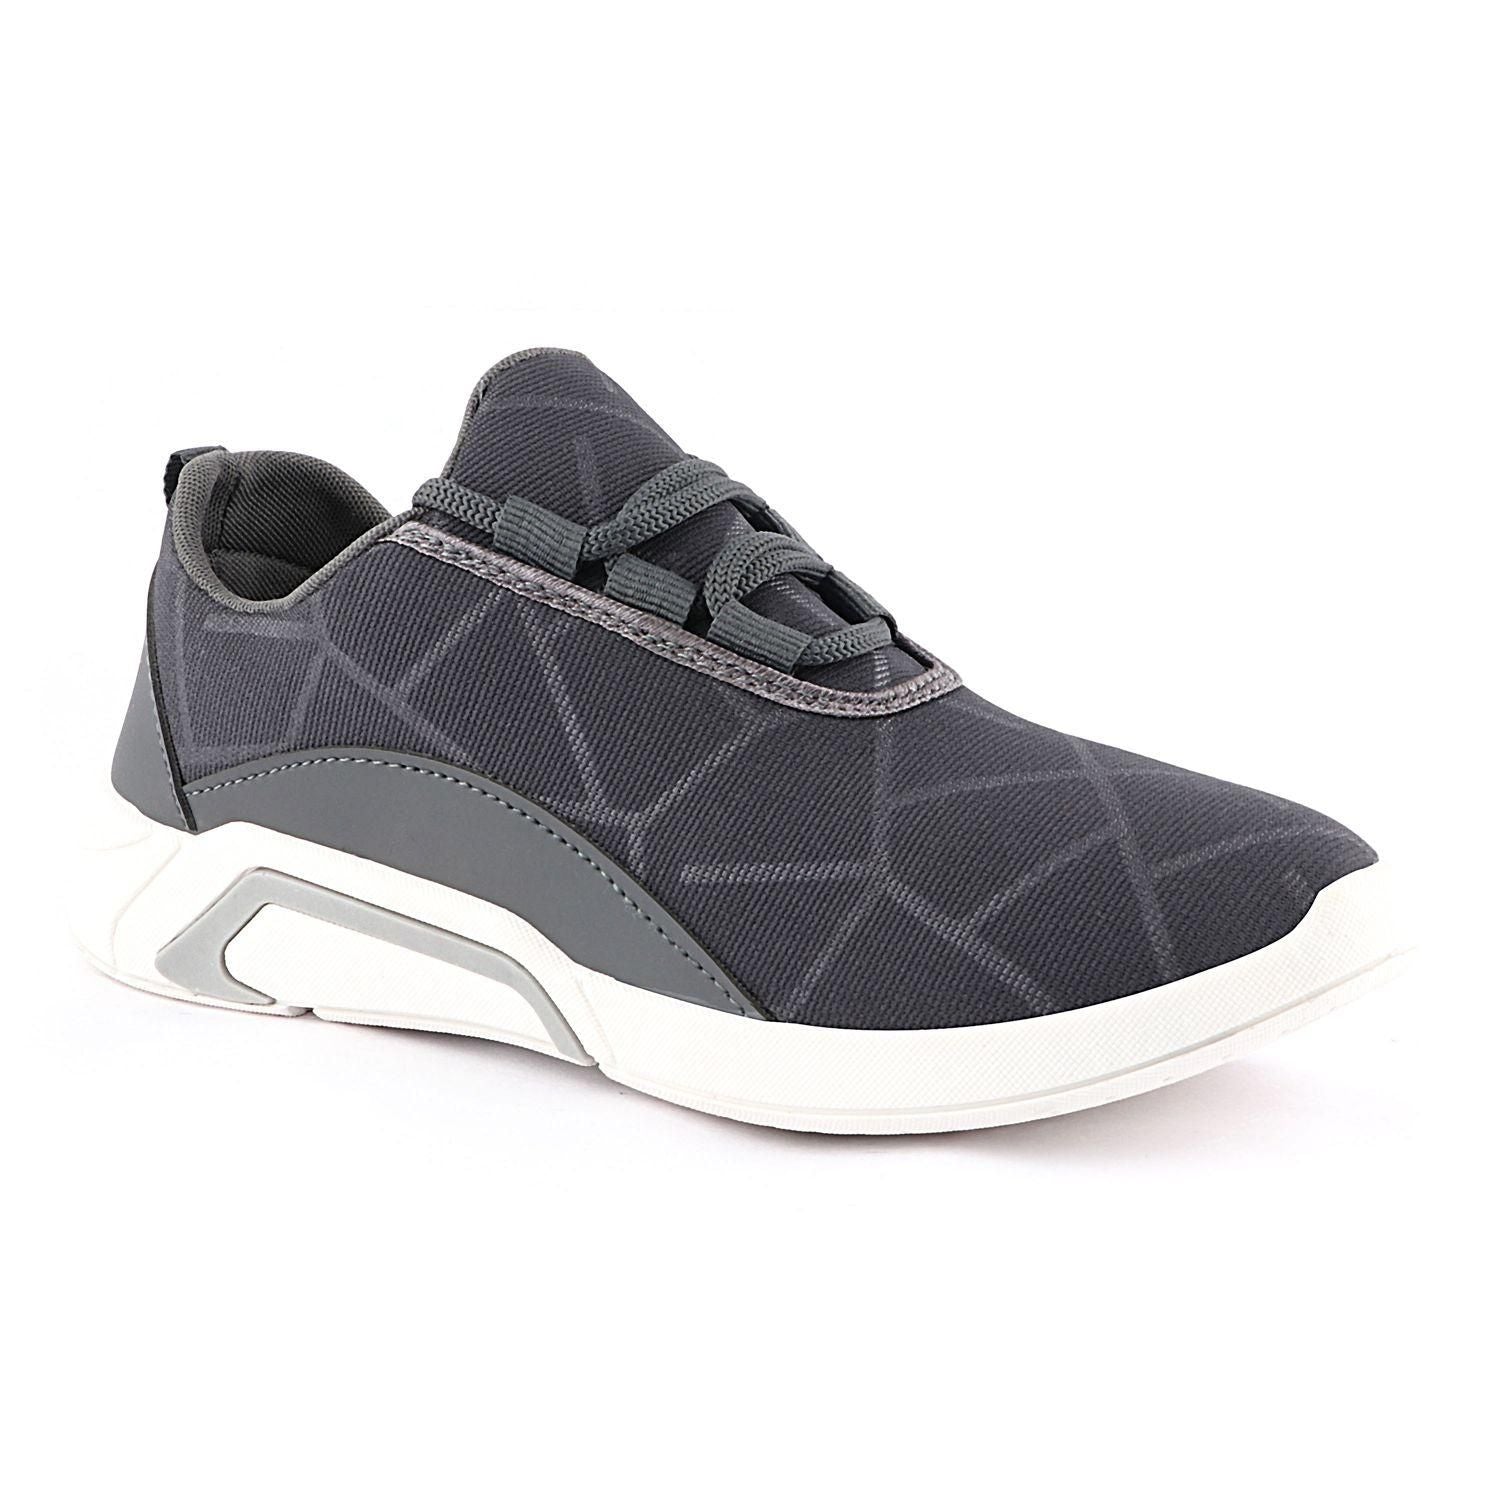 Men's Grey Light Weight Running Shoes - Adorable Me